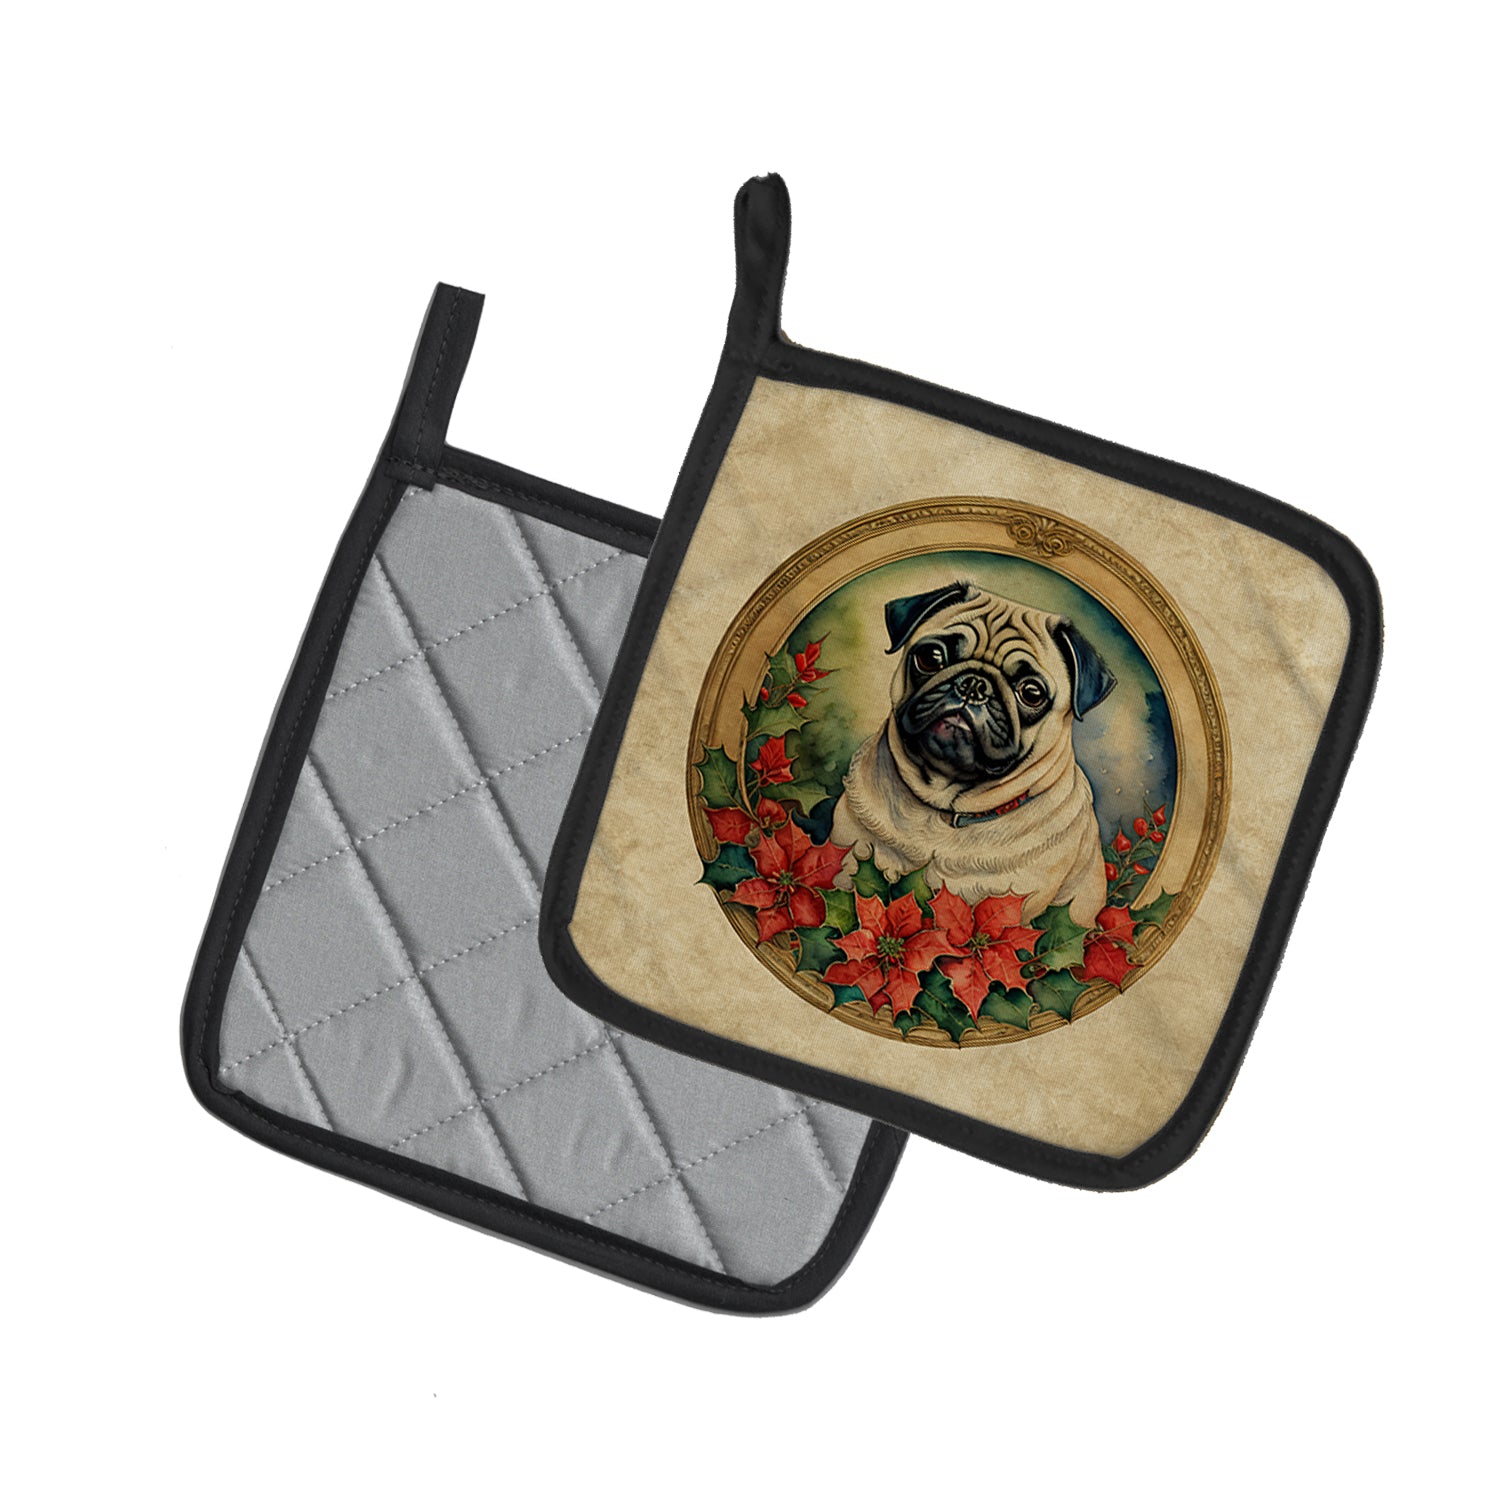 Buy this Pug Christmas Flowers Pair of Pot Holders